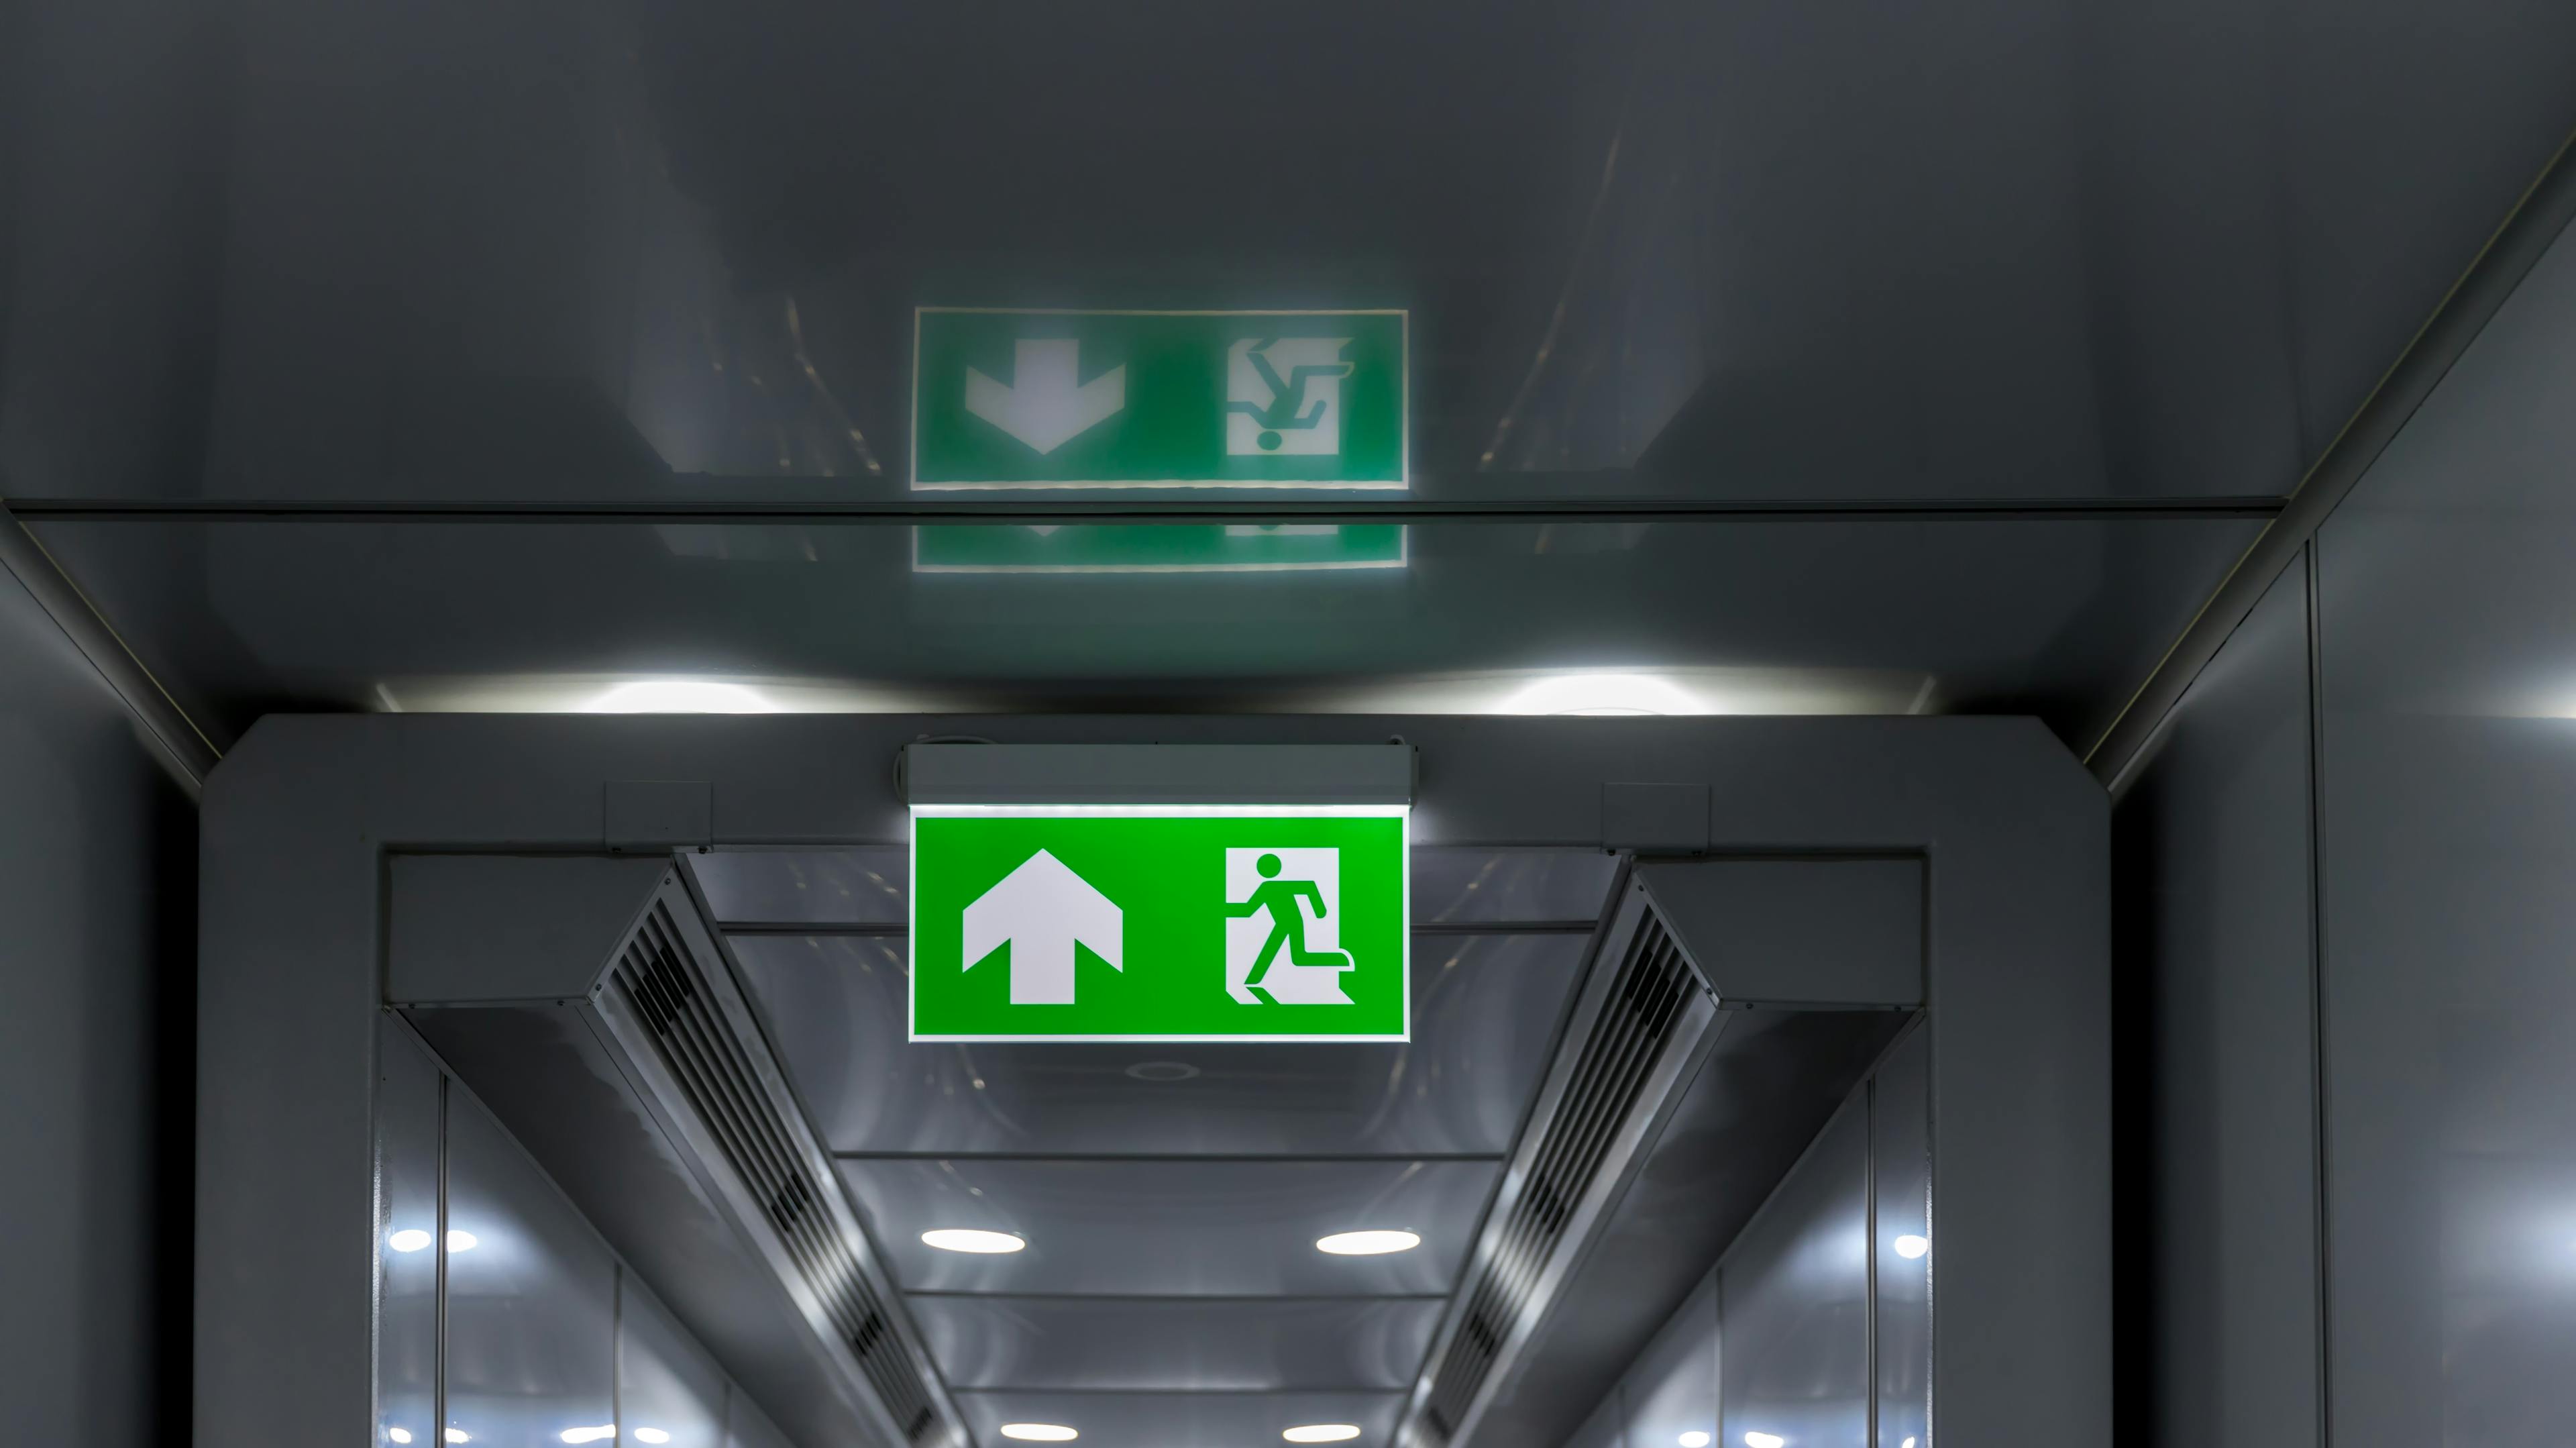 An image related to Exit Signs